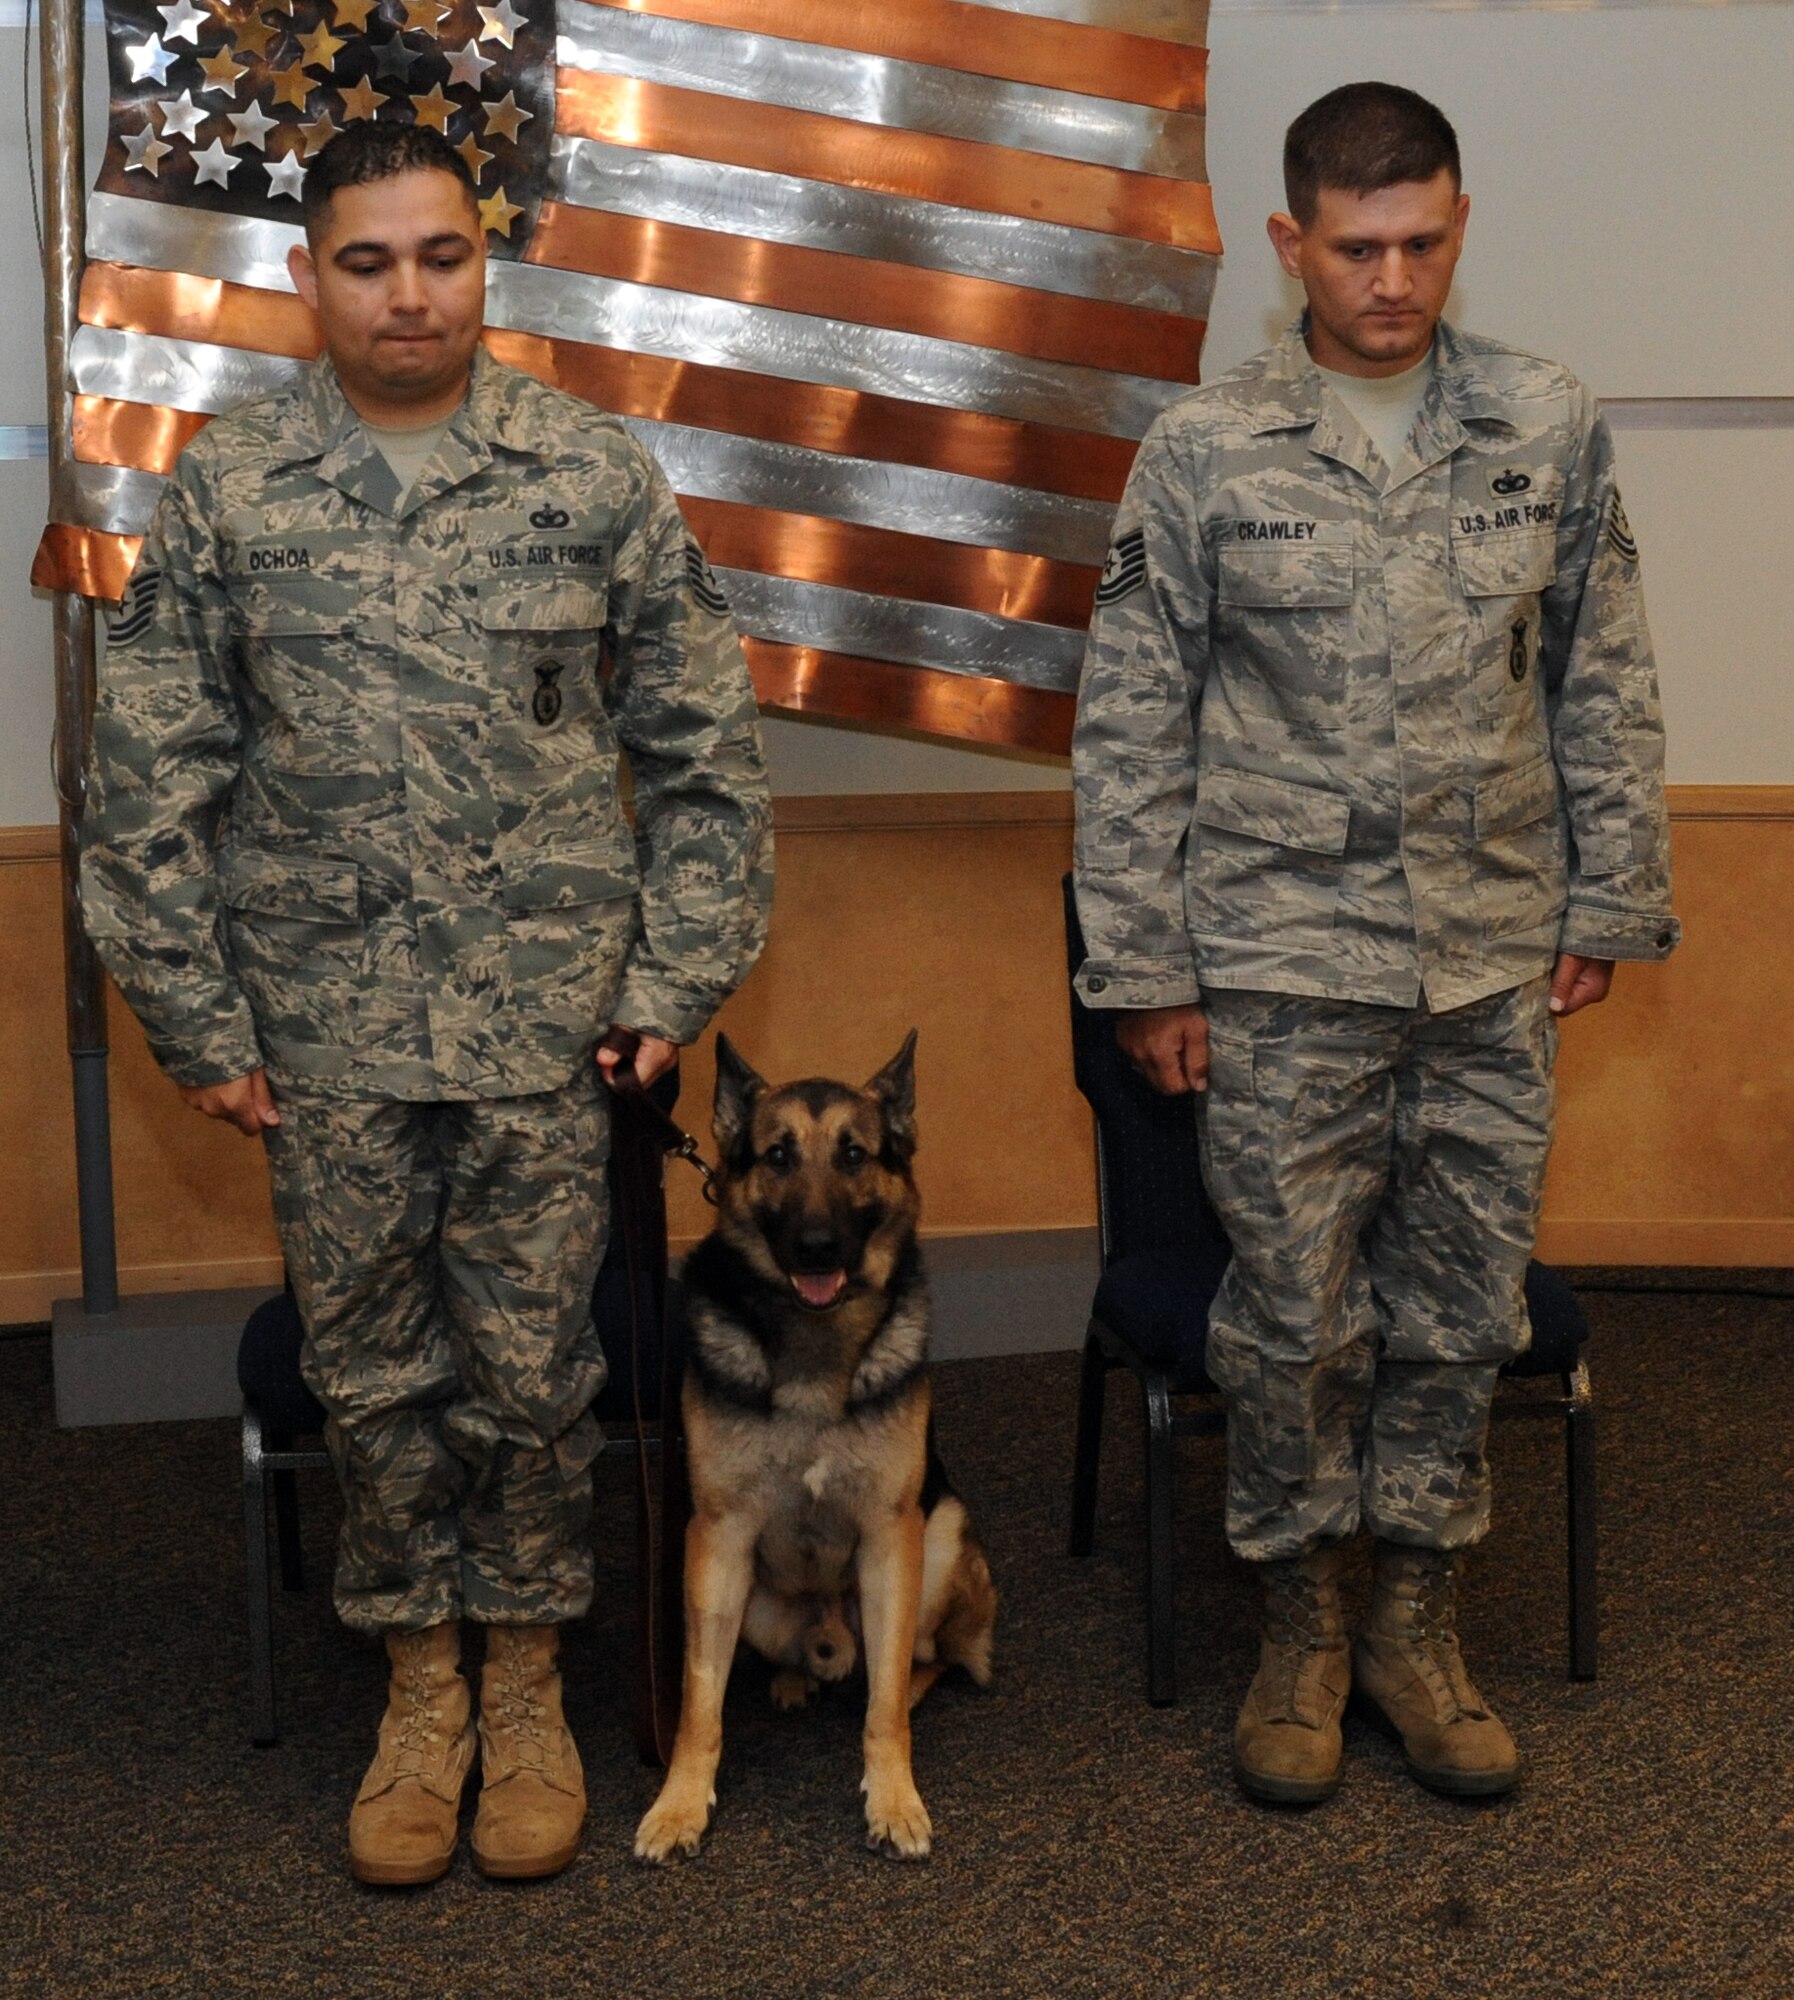 Tech. Sgt. Mark Ochoa (from left to right), 319th Security Forces Squadron kennel master, Nick/J252, a military working dog with the 319th SFS and Tech. Sgt. David Crawley, 319th SFS MWD handler, prepare to formally retire Nick, Oct. 6 at Heritage Hall on Grand Forks Air Force Base. Nick was stationed at Grand Forks AFB for four years before he was medically retired. During Nick’s military career, he has deployed twice in support of Operation Iraqi Freedom and also supported U.S. secret service missions protecting heads of states and the President of the United States. Nick was adopted by his former handler, Sergeant Crawley. (U.S. Air Force photo by Tech. Sgt. Johnny Saldivar)  